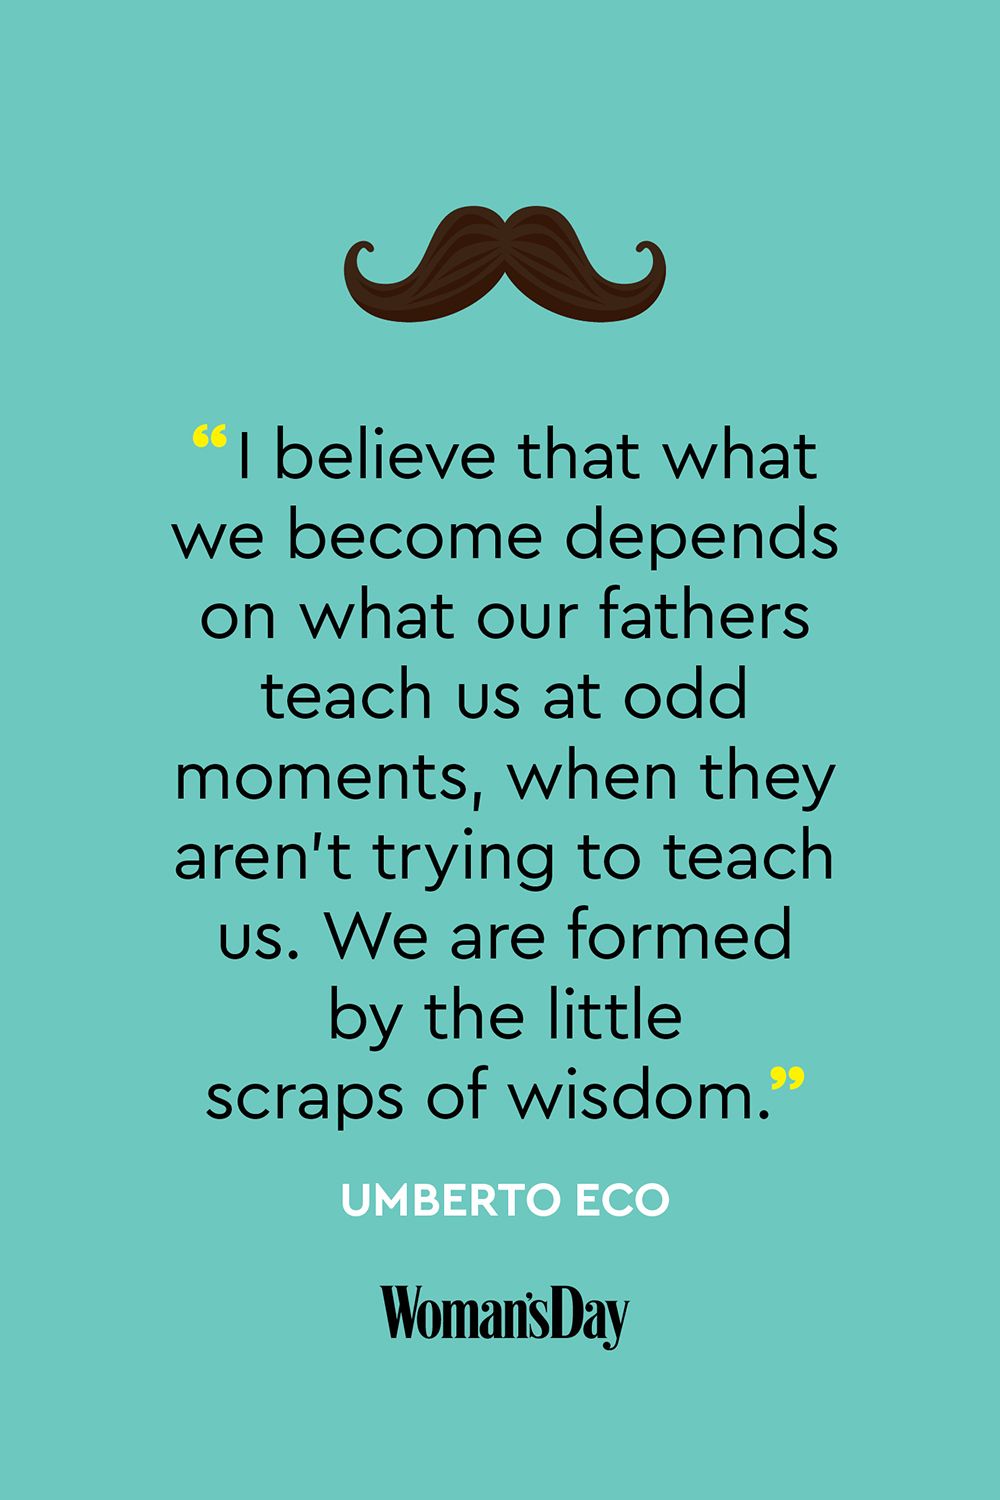 i believe that what we become depends on what out fathers teach us at odd moments, when they aren’t trying to teach us. we are formed by the little scraps of wisdom. umberto eco